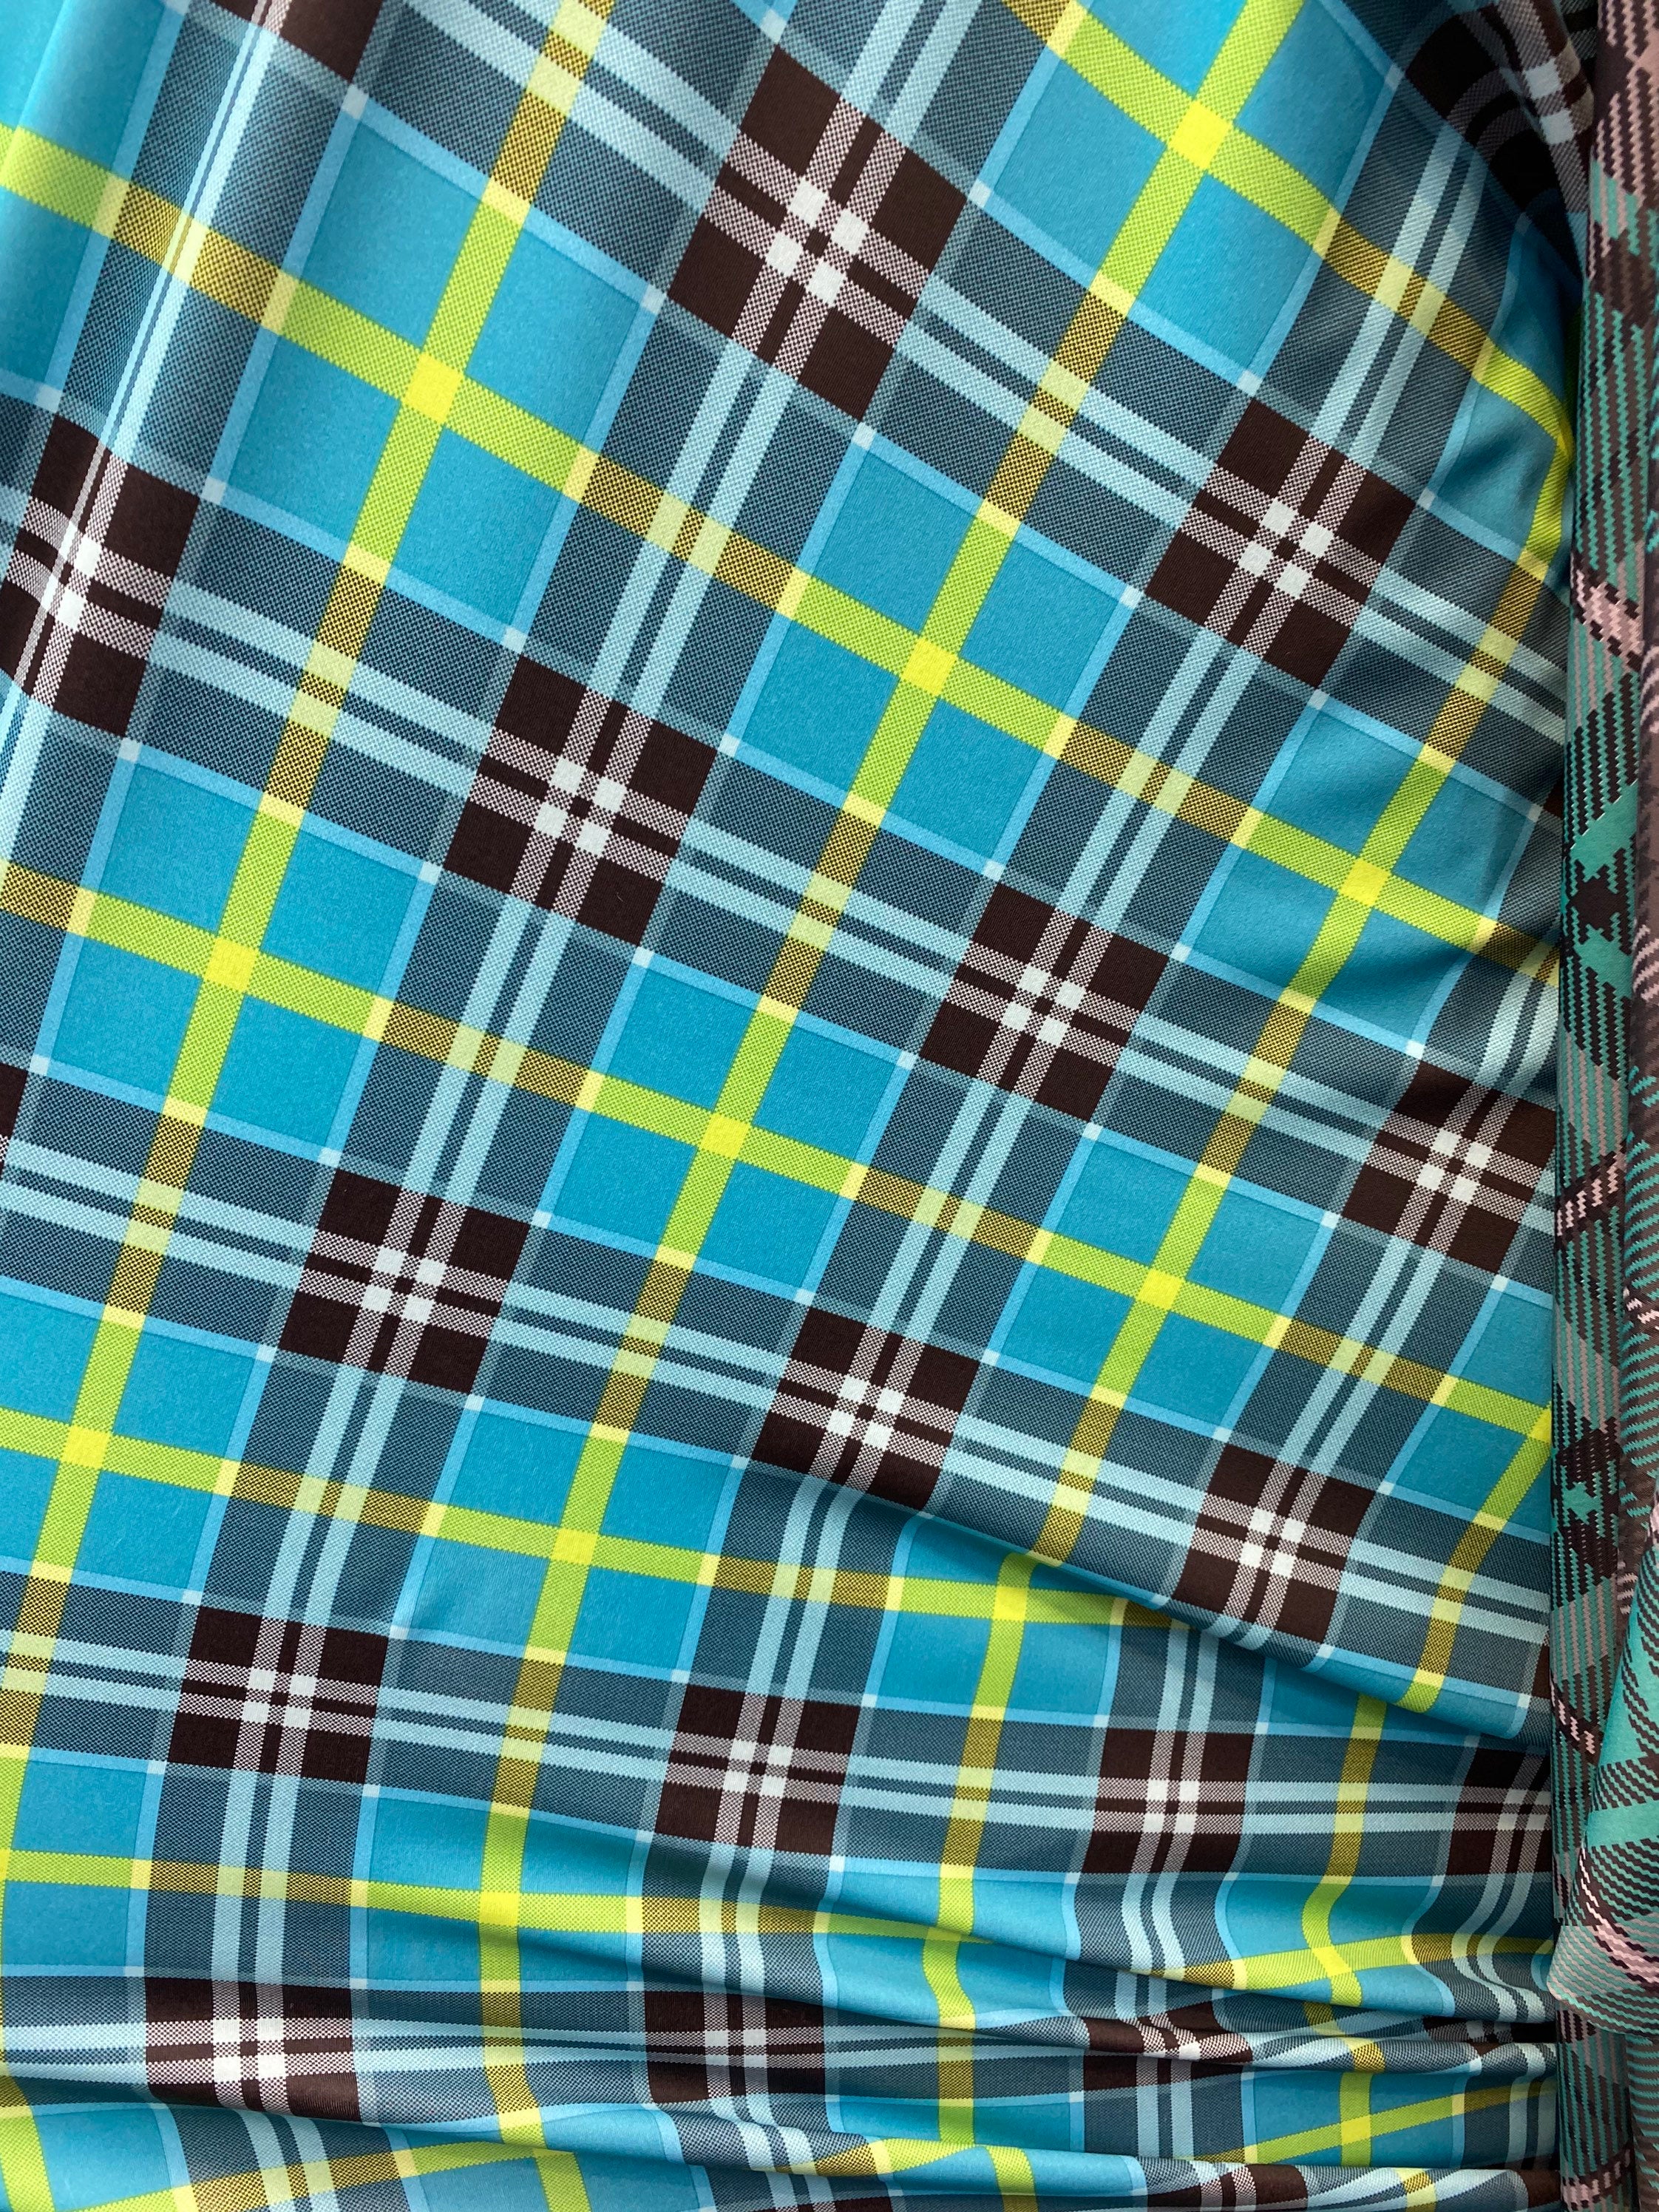 Turquoise Plaid Spandex Lycra 60" Wide || Dance Fabric by the Yard